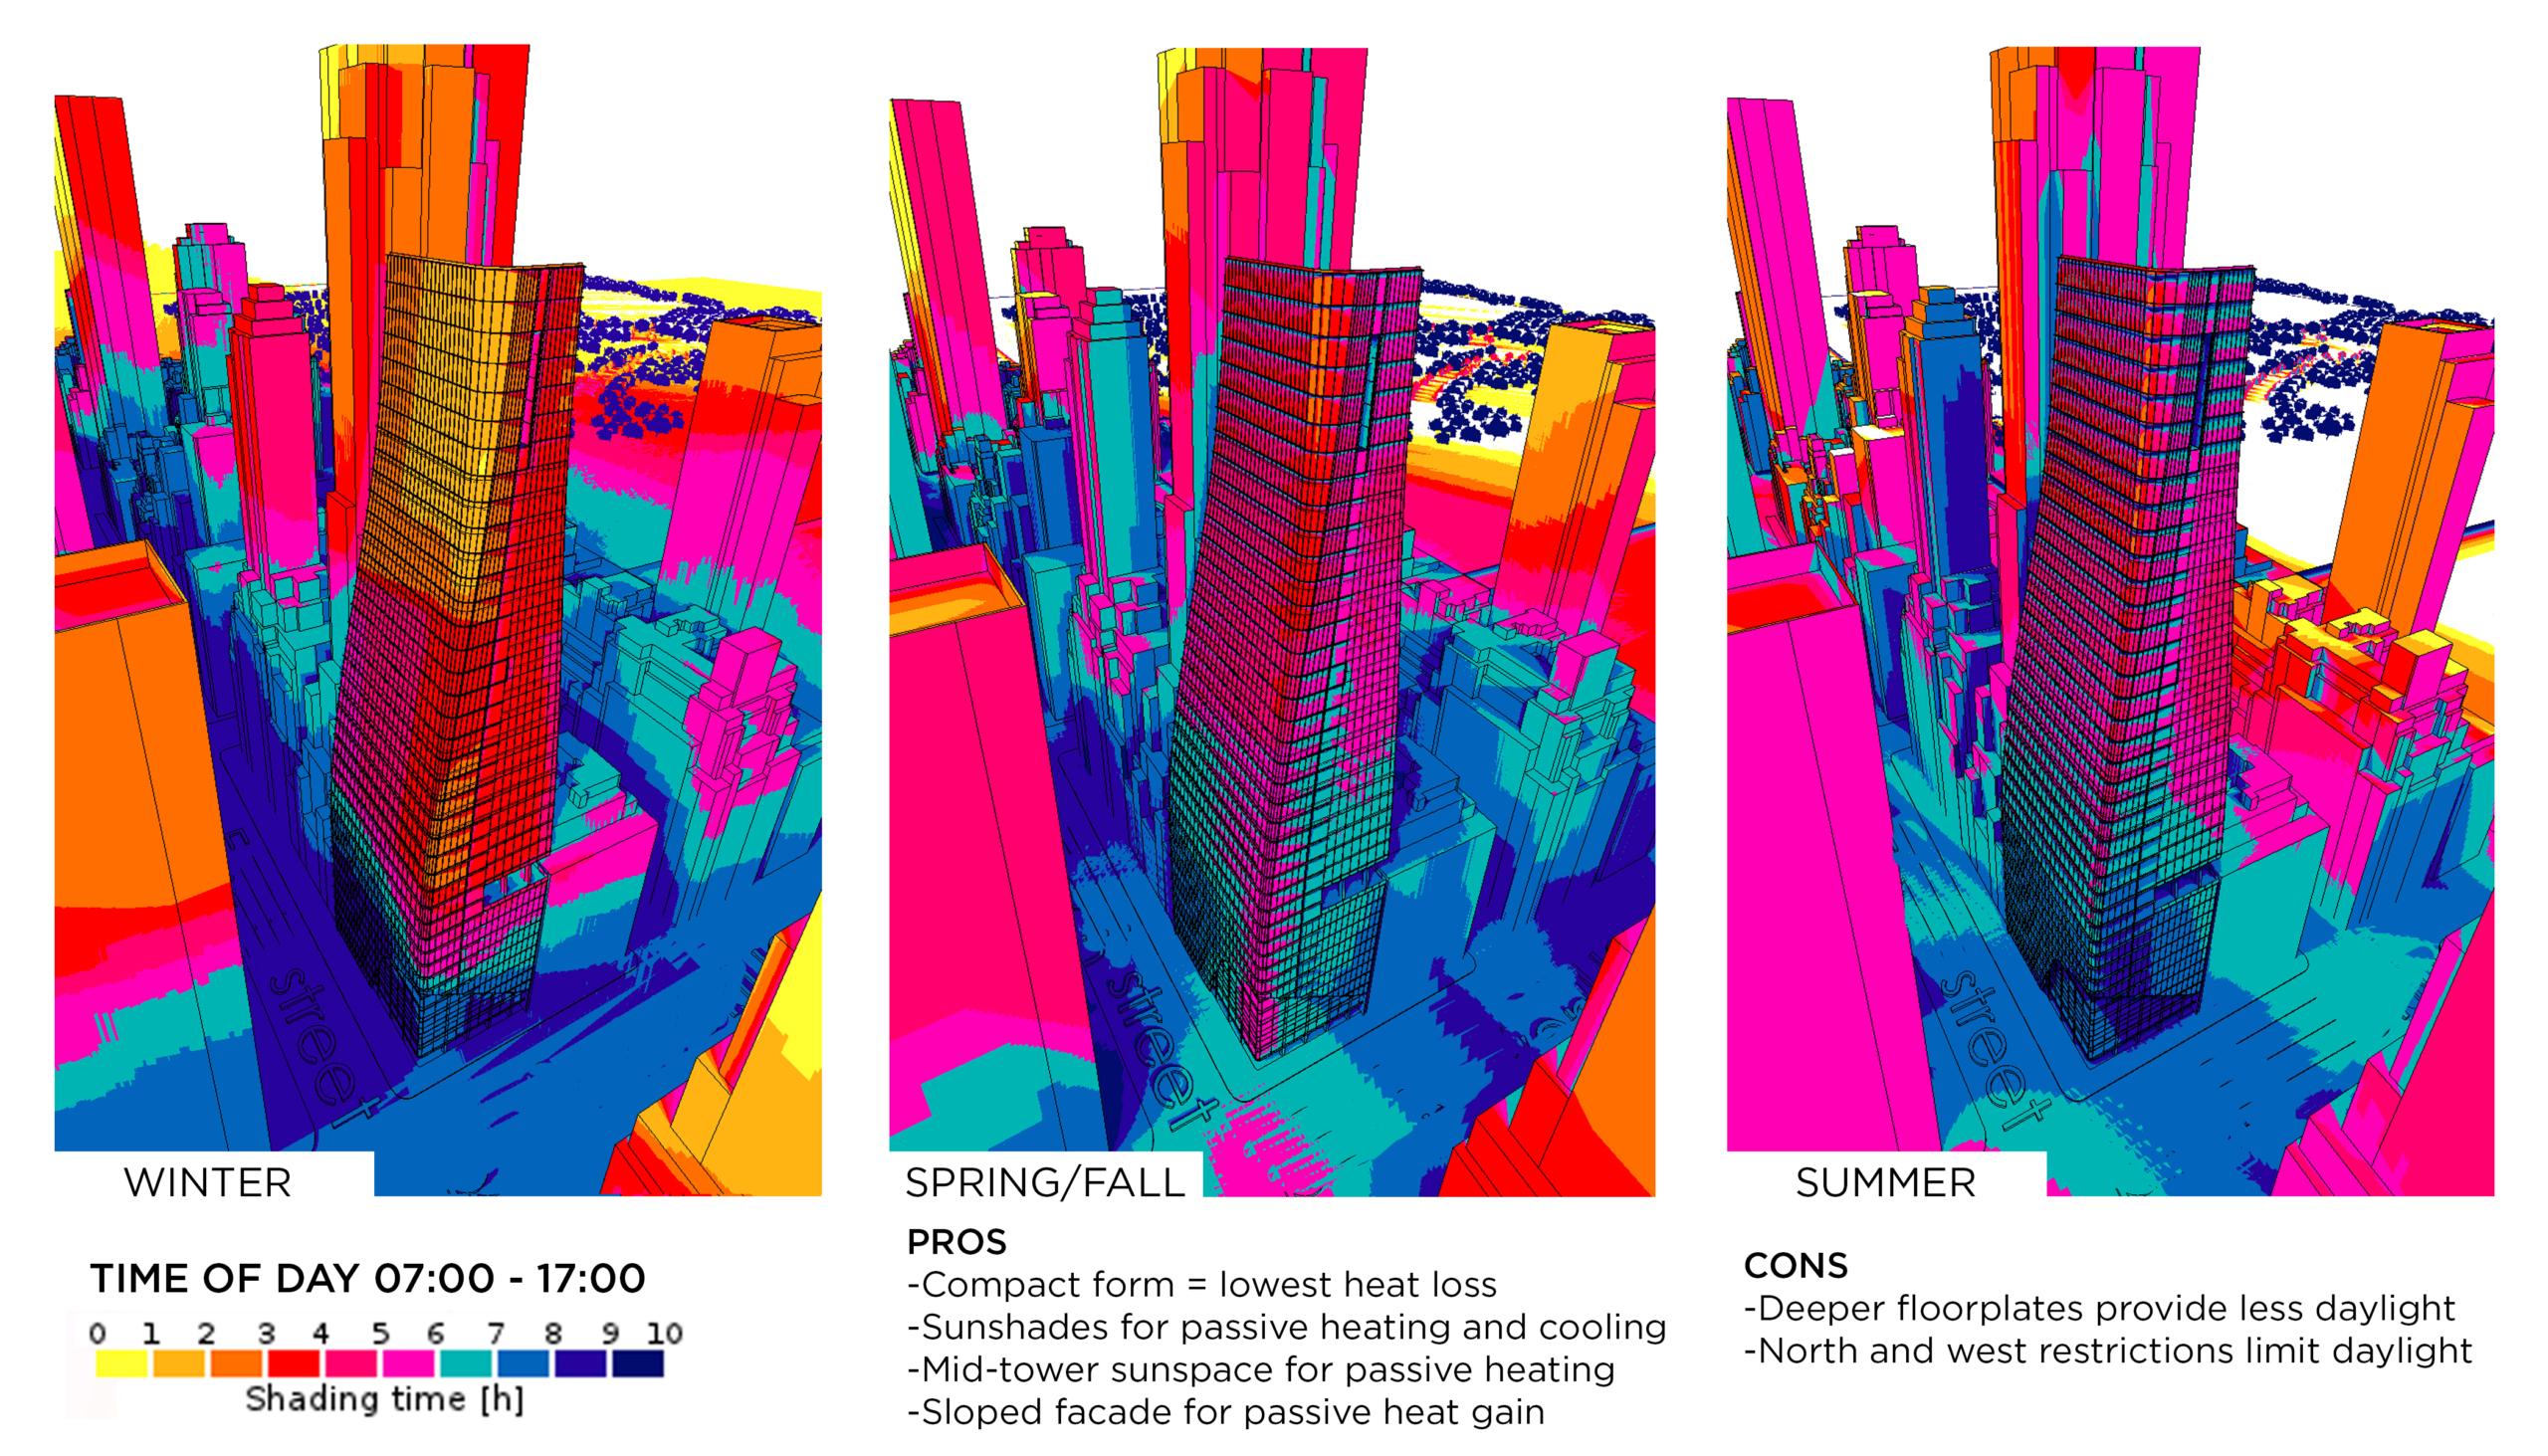 Daylighting analysis of a confidential mixed-use tower